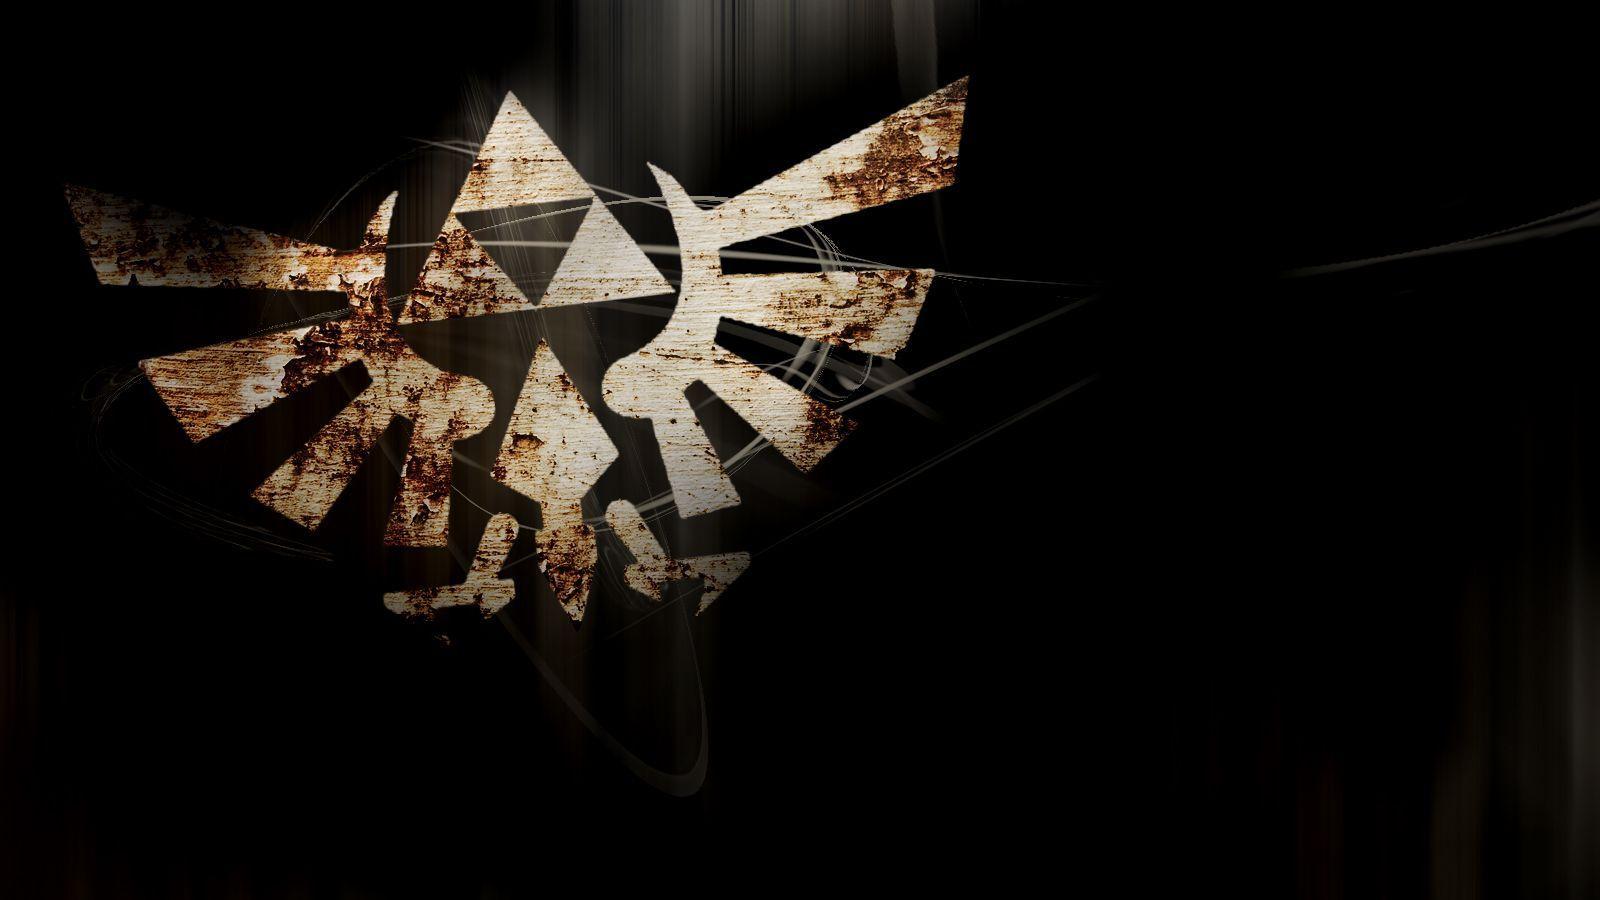 Download Triforce The Wallpaper 1600x900